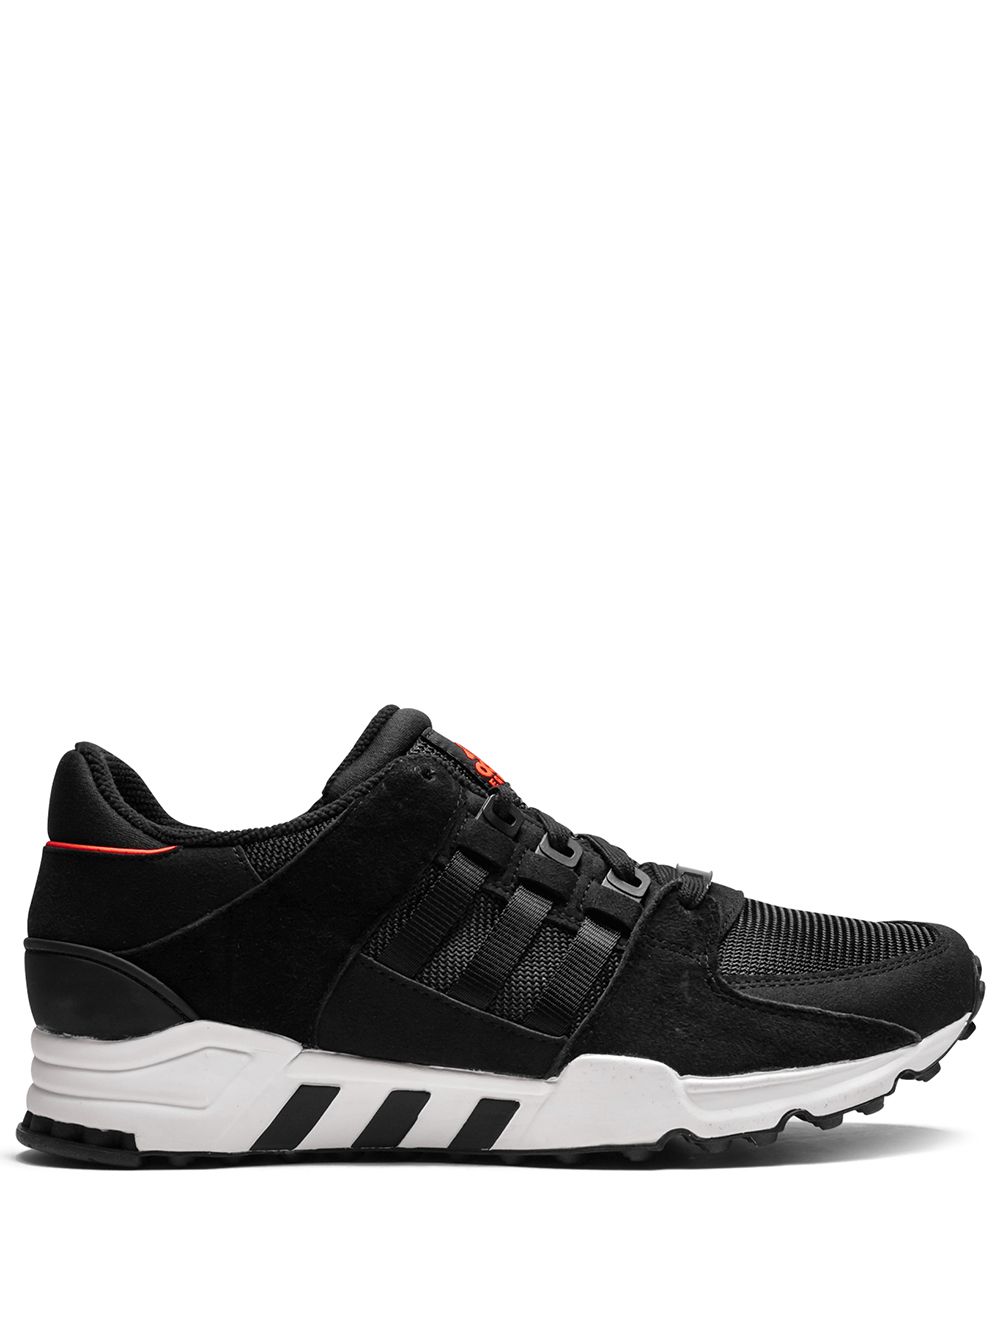 Shop black adidas Equipment Running Support sneakers with Express Delivery  - Farfetch